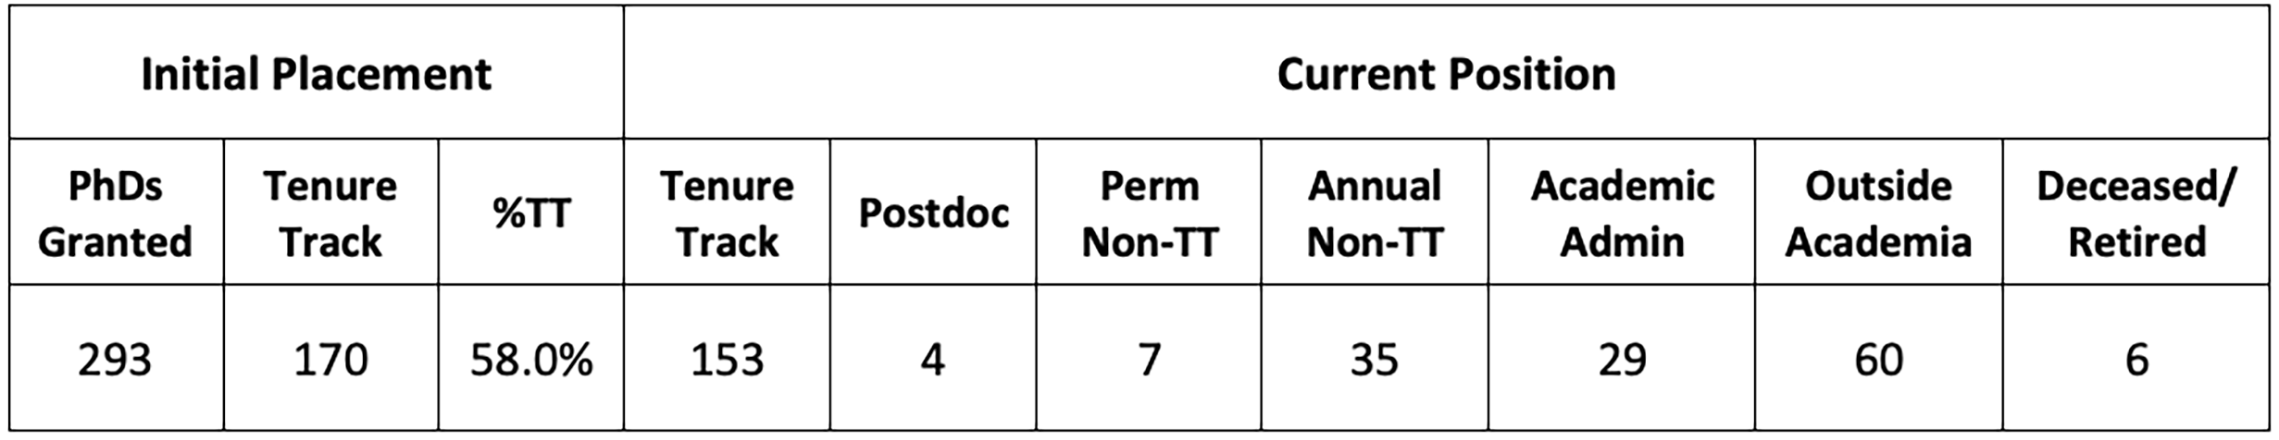 Table showing PhD job placement from 2001-22, as described in text